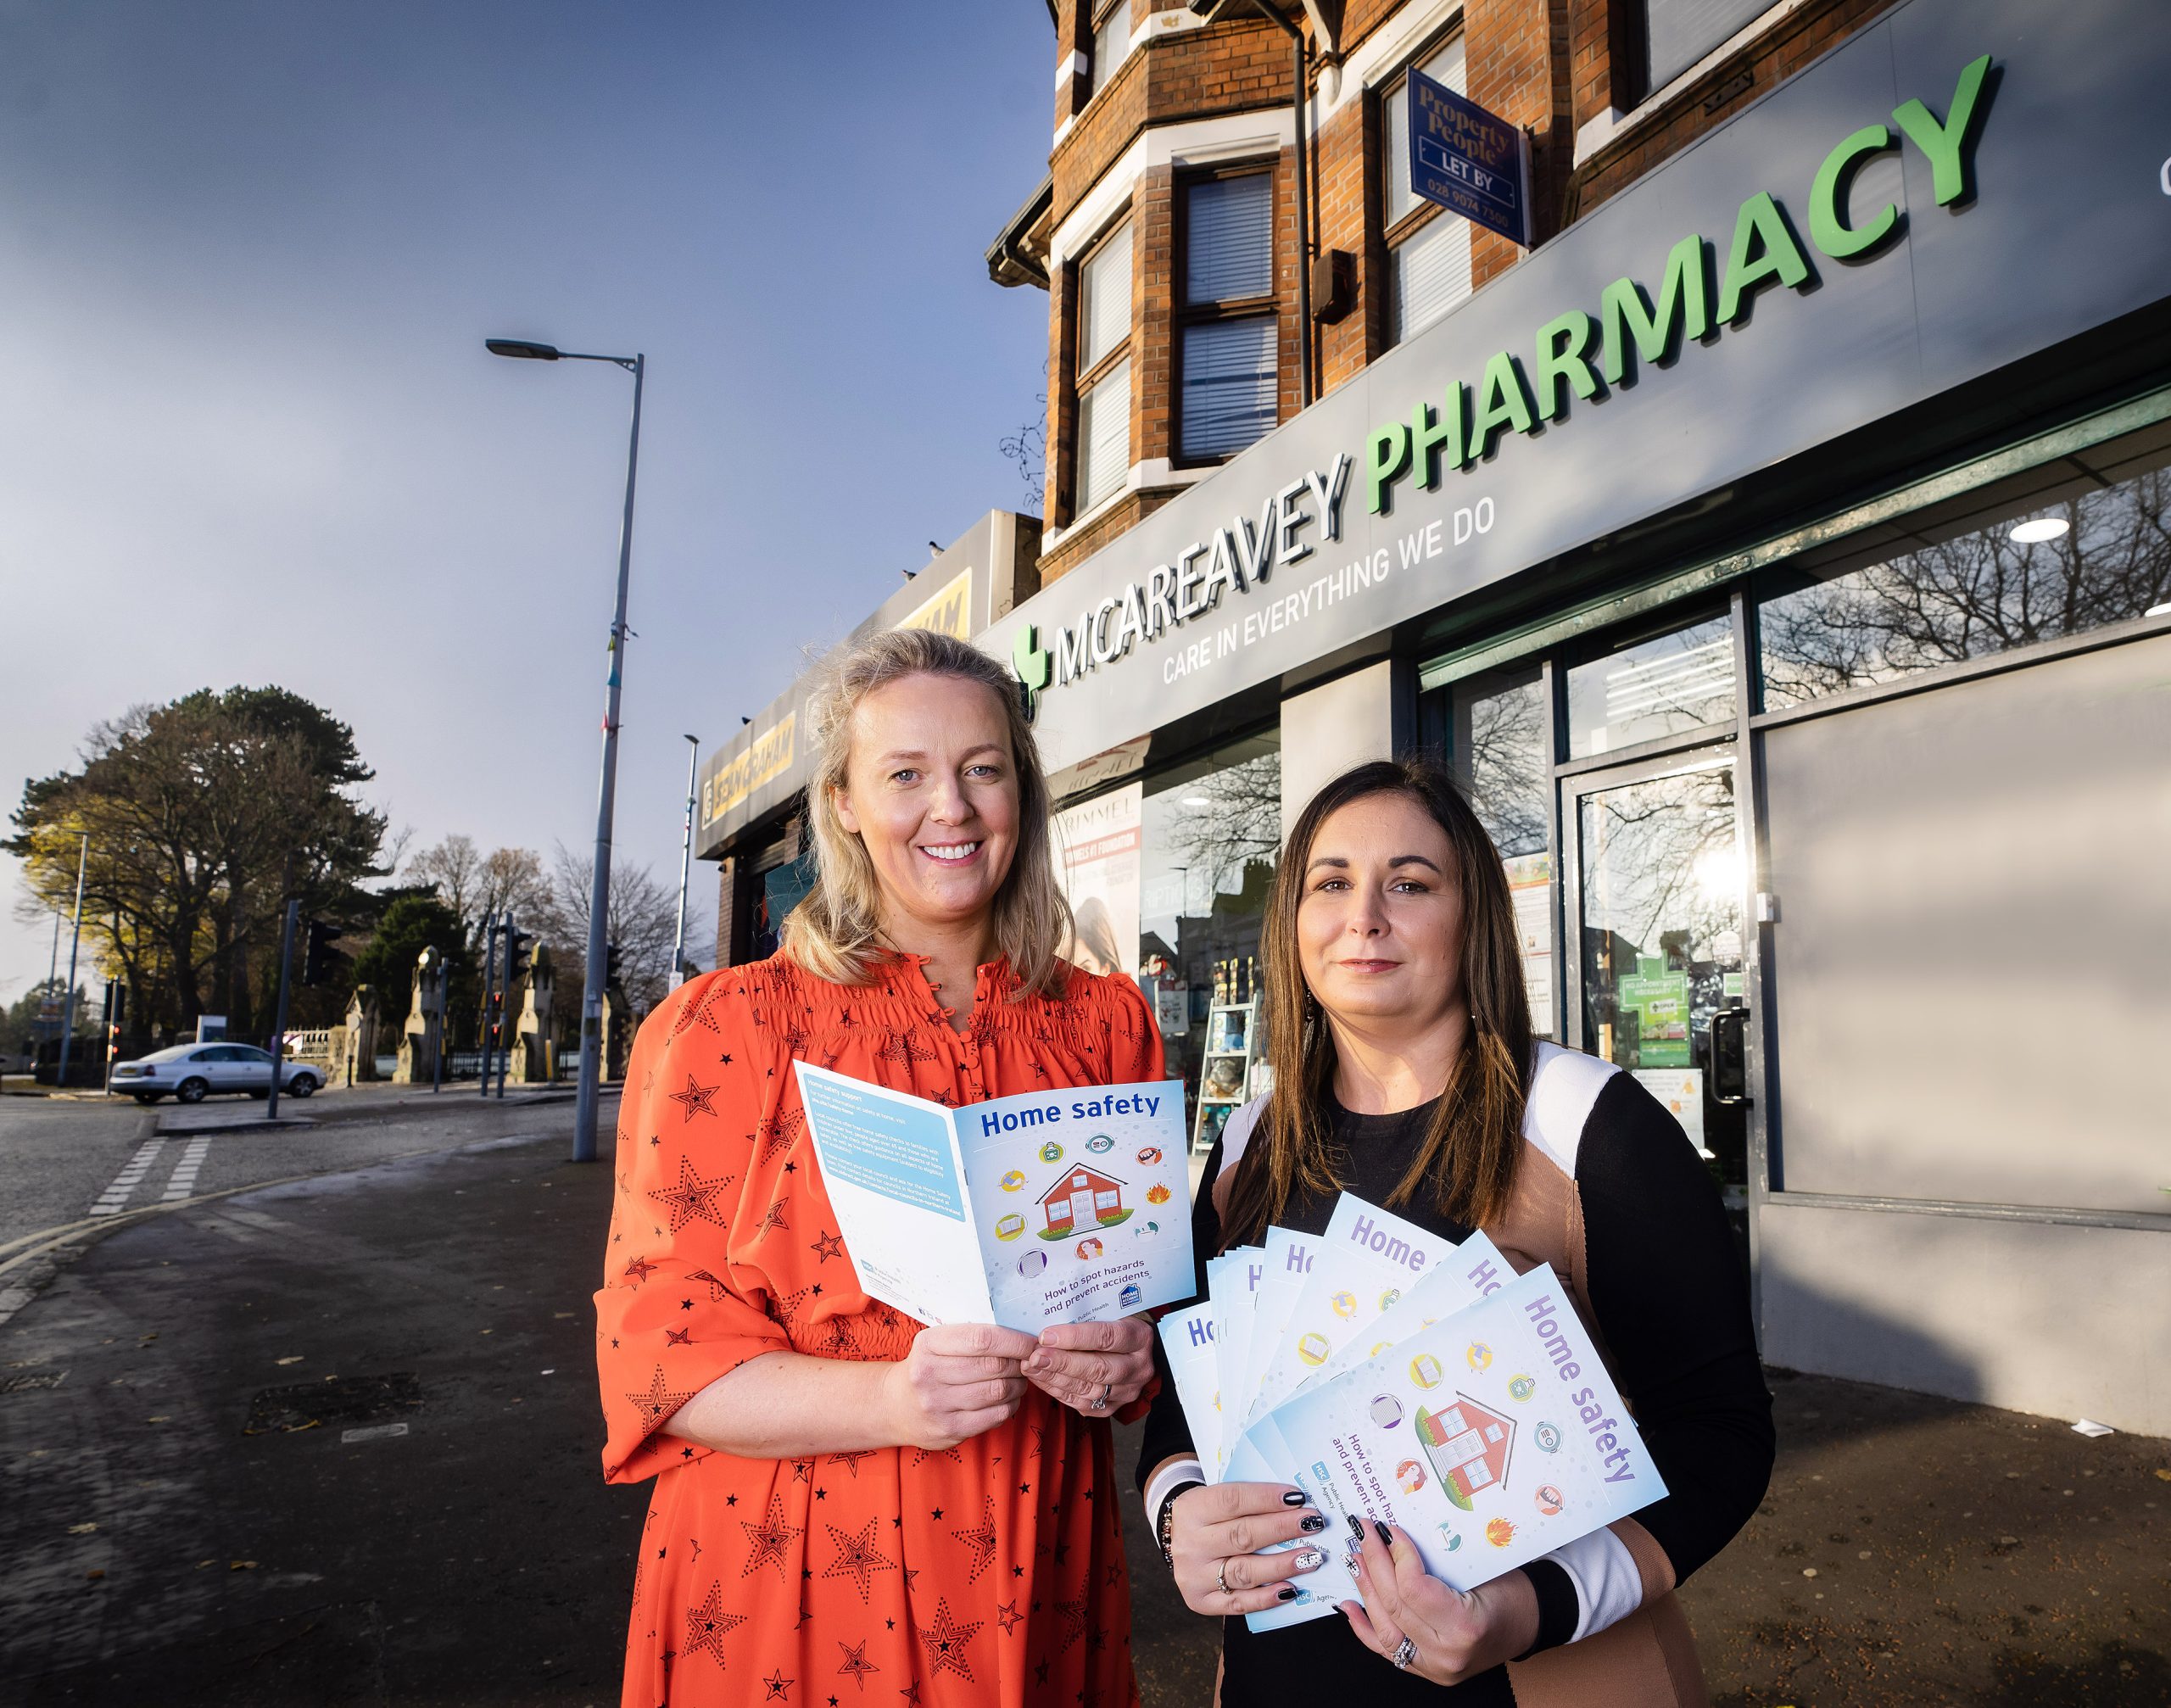 Community pharmacies deliver vital home safety messages